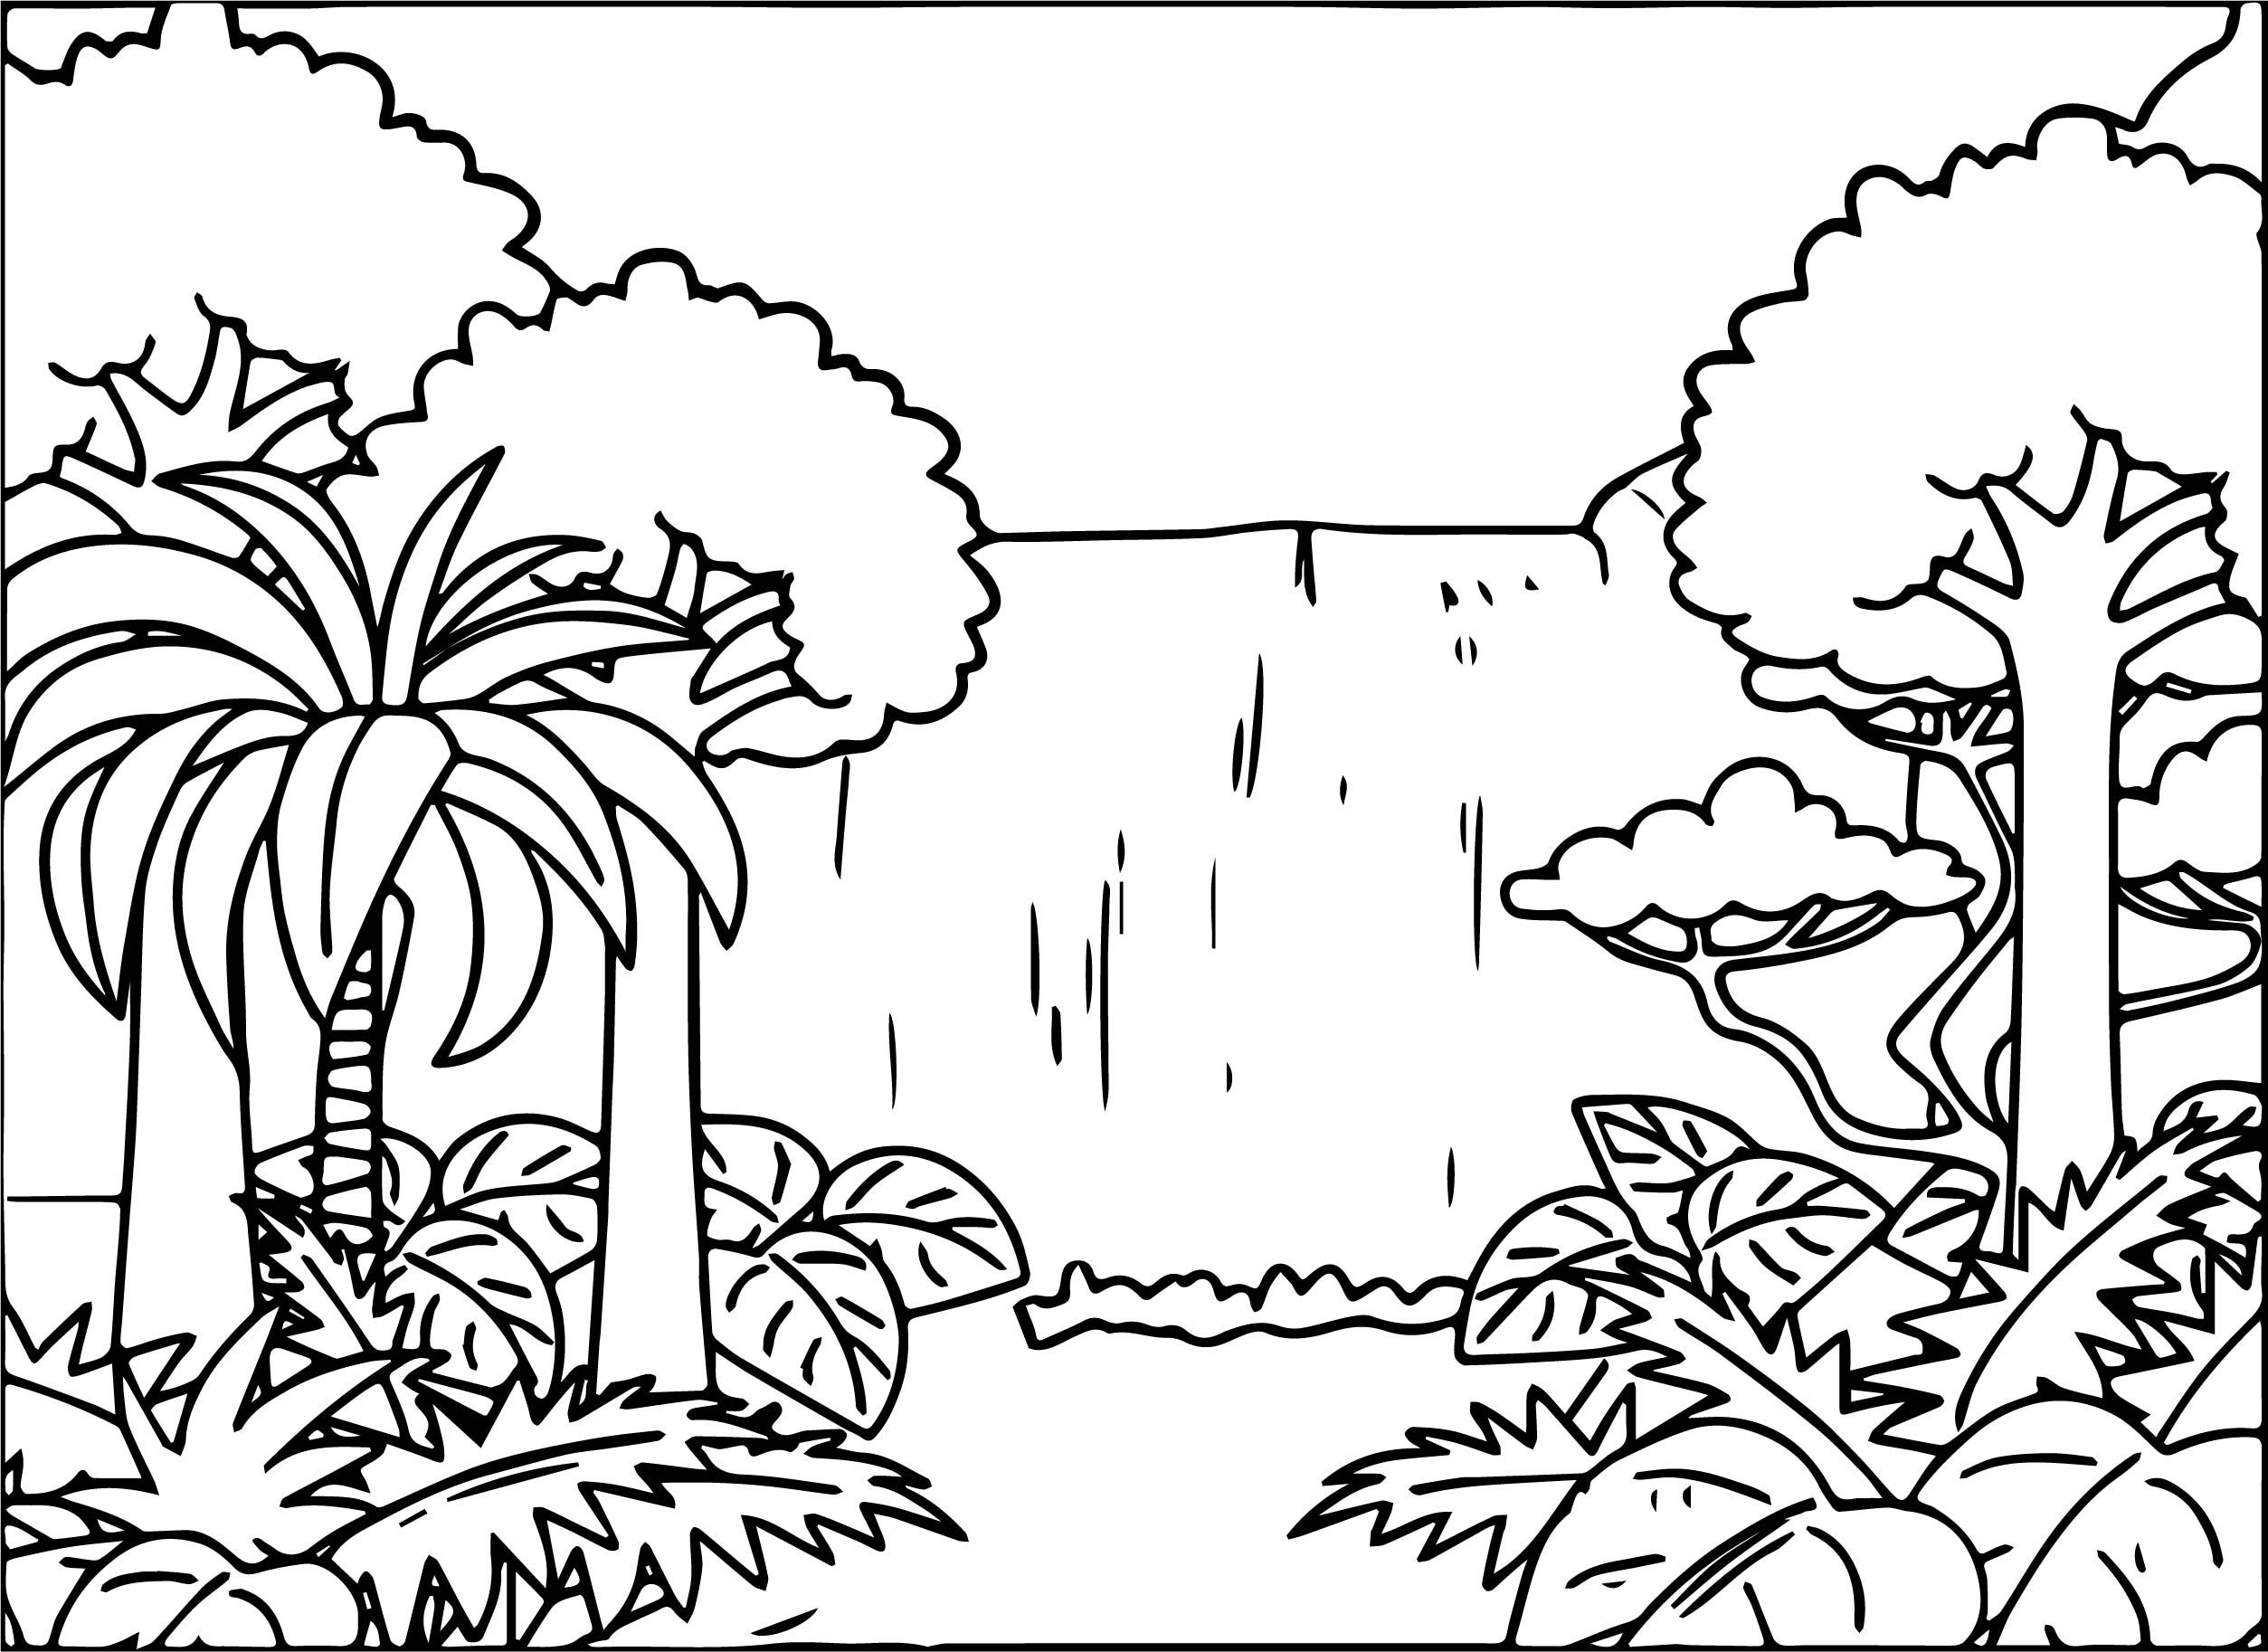 How to Draw a Jungle - Really Easy Drawing Tutorial